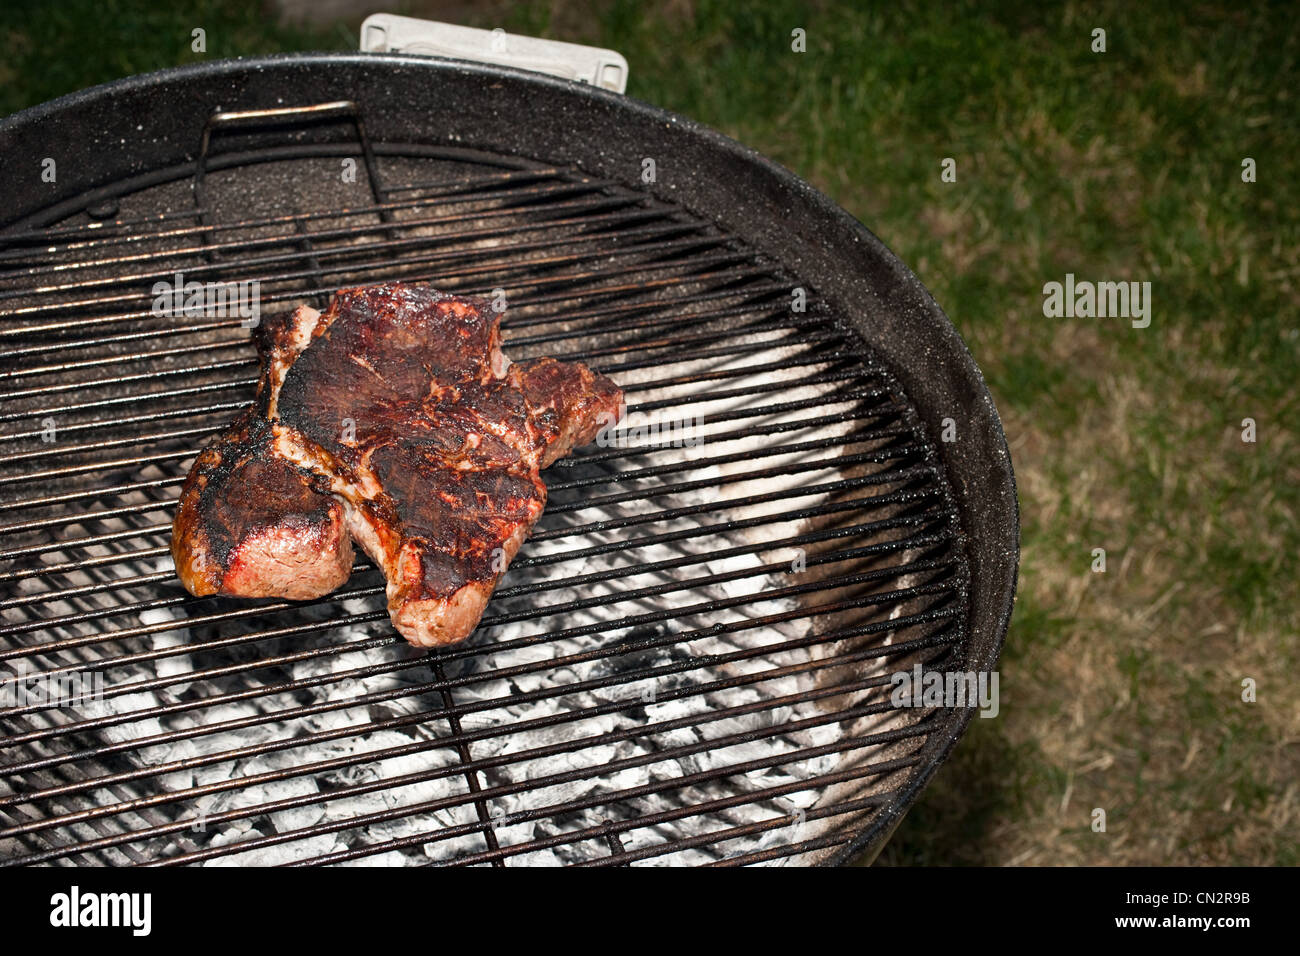 Meat cooking on barbecue Stock Photo